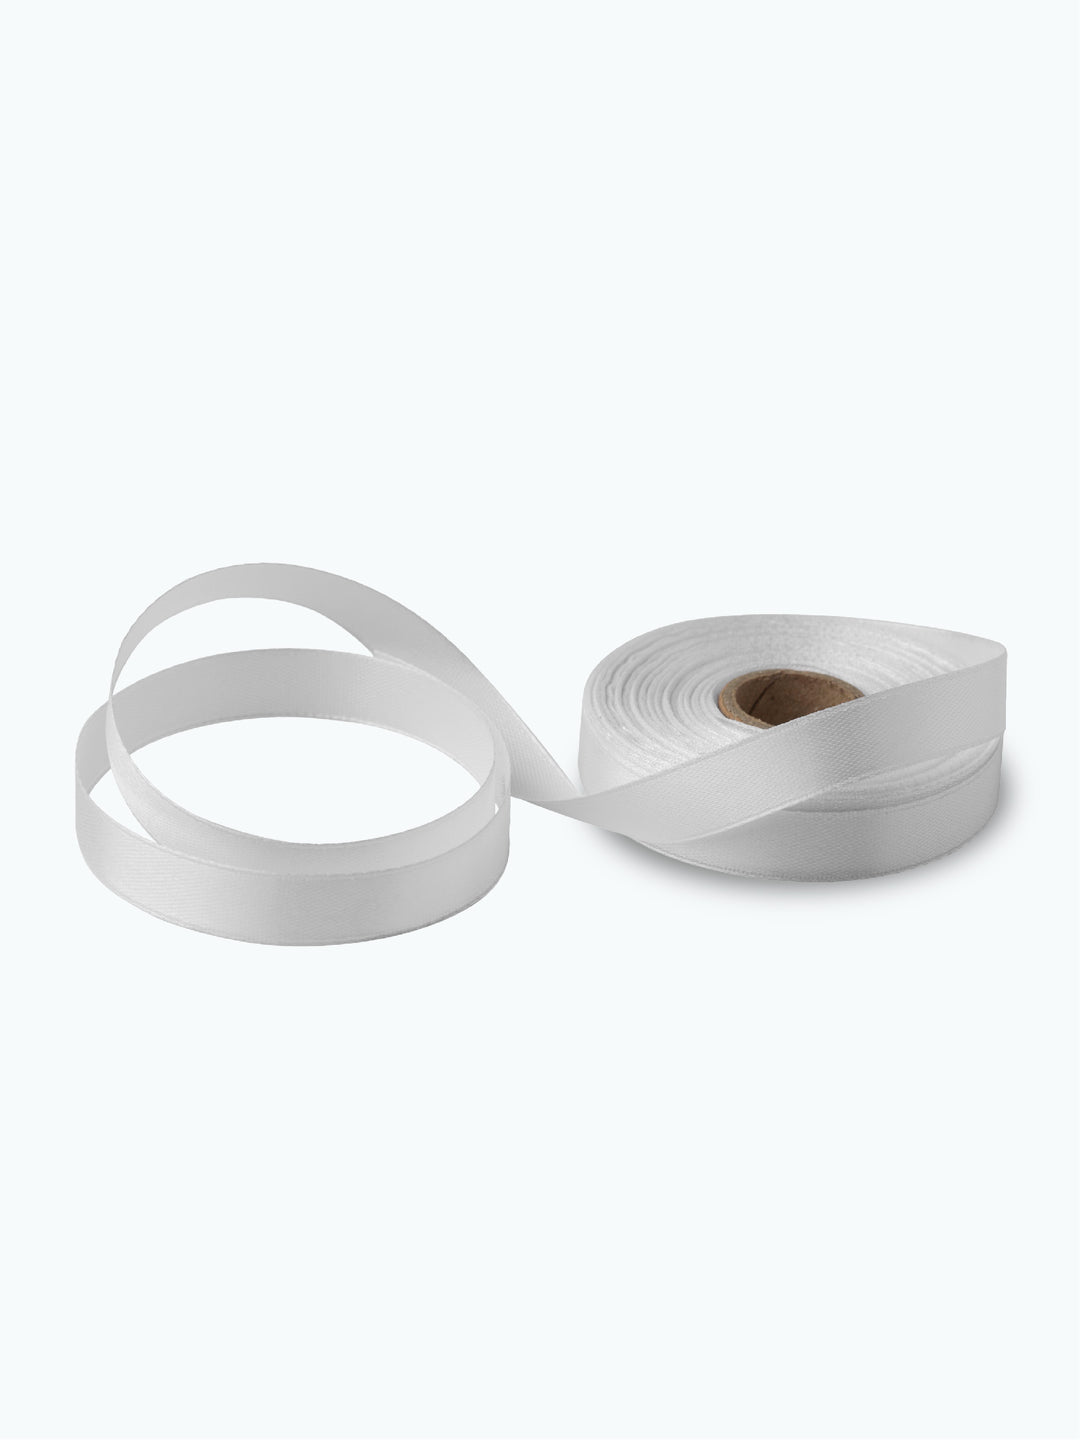 COMPOSTABLE RIBBON FOR ECO-FRIENDLY PACKAGING, DIY, GIFTING & MORE.